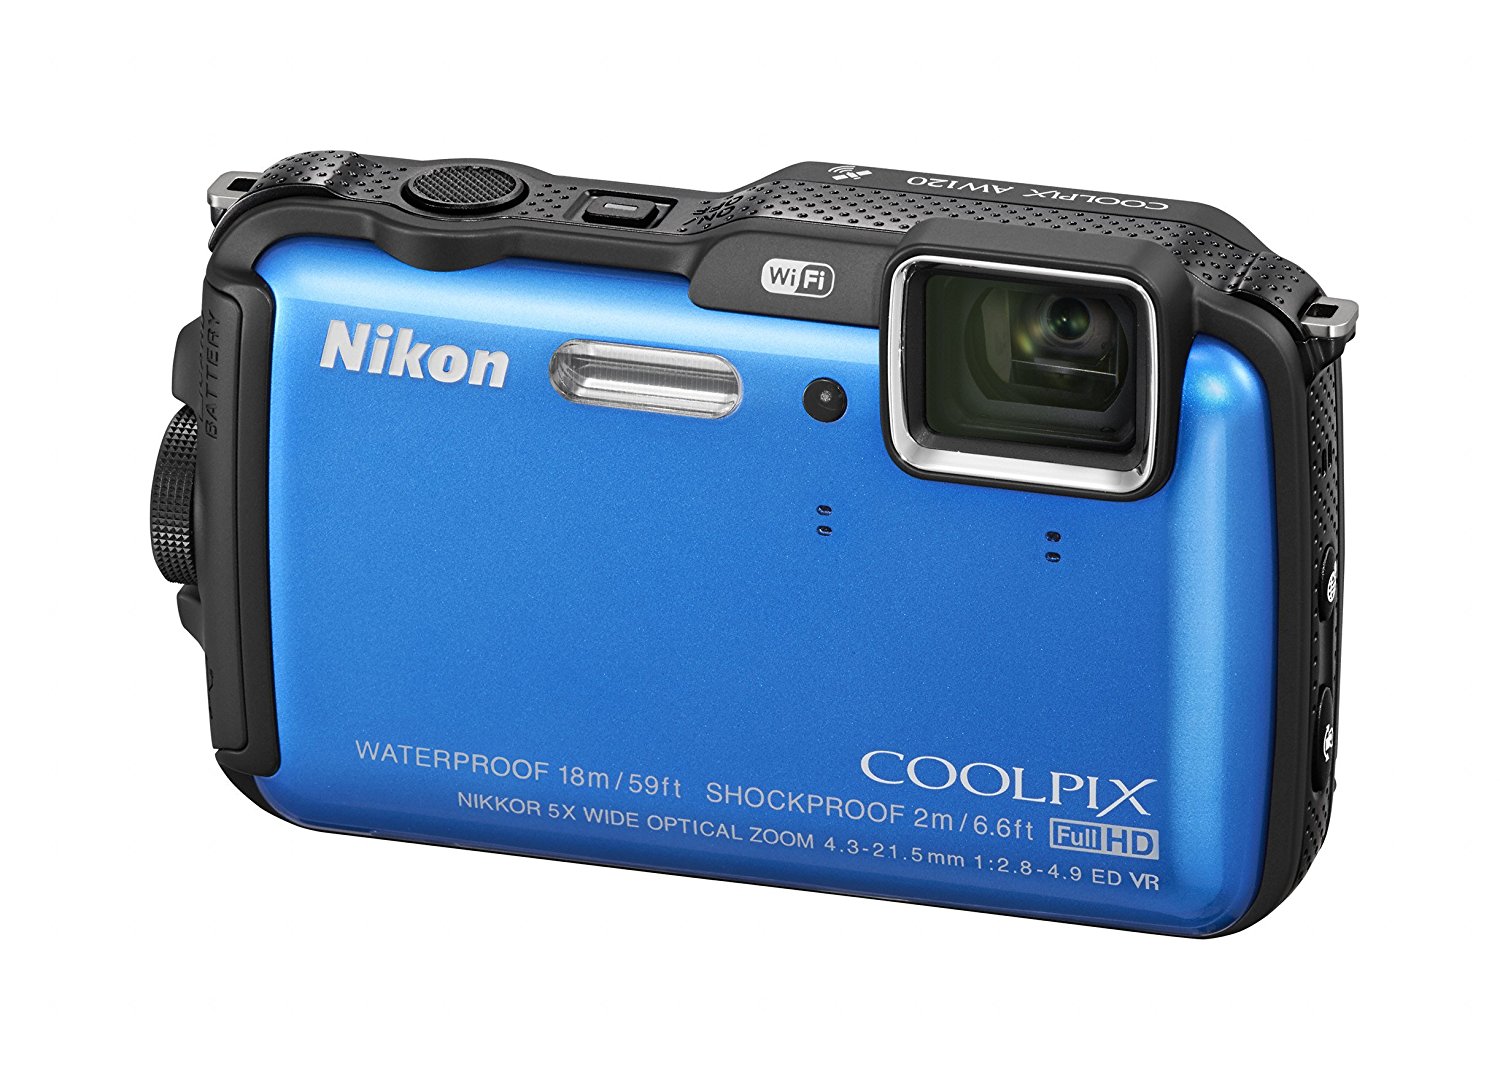 Nikon Coolpix Aw120 161 Mp Wi Fi And Waterproof Digital Camera With Gps And Full Hd 1080p Video 5358